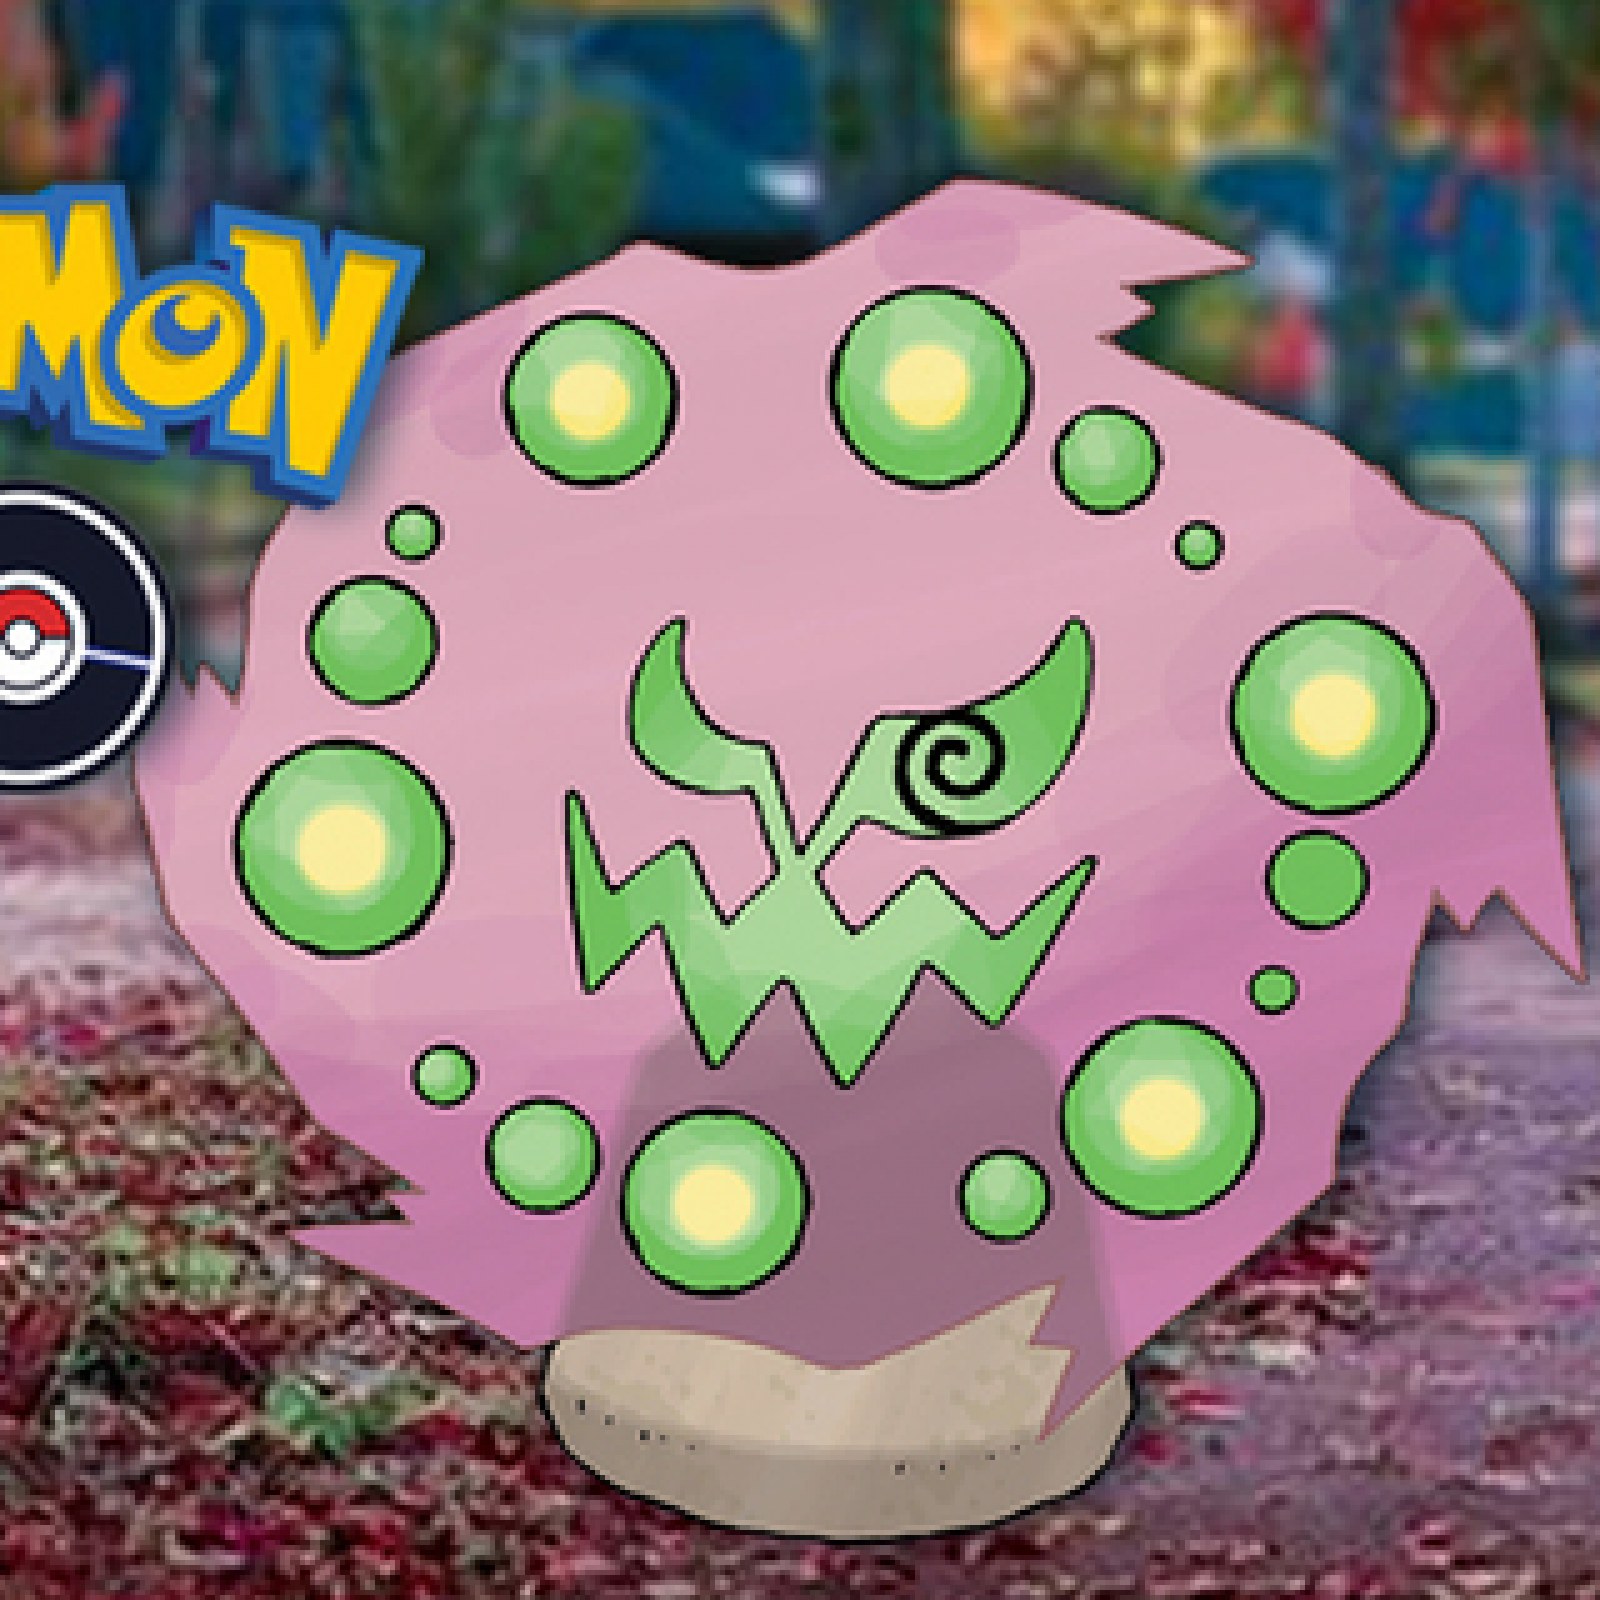 Pokemon GO Halloween 2018 CONFIRMED: Gen 4 Spiritomb special research,  Quests, Items NEWS - Daily Star